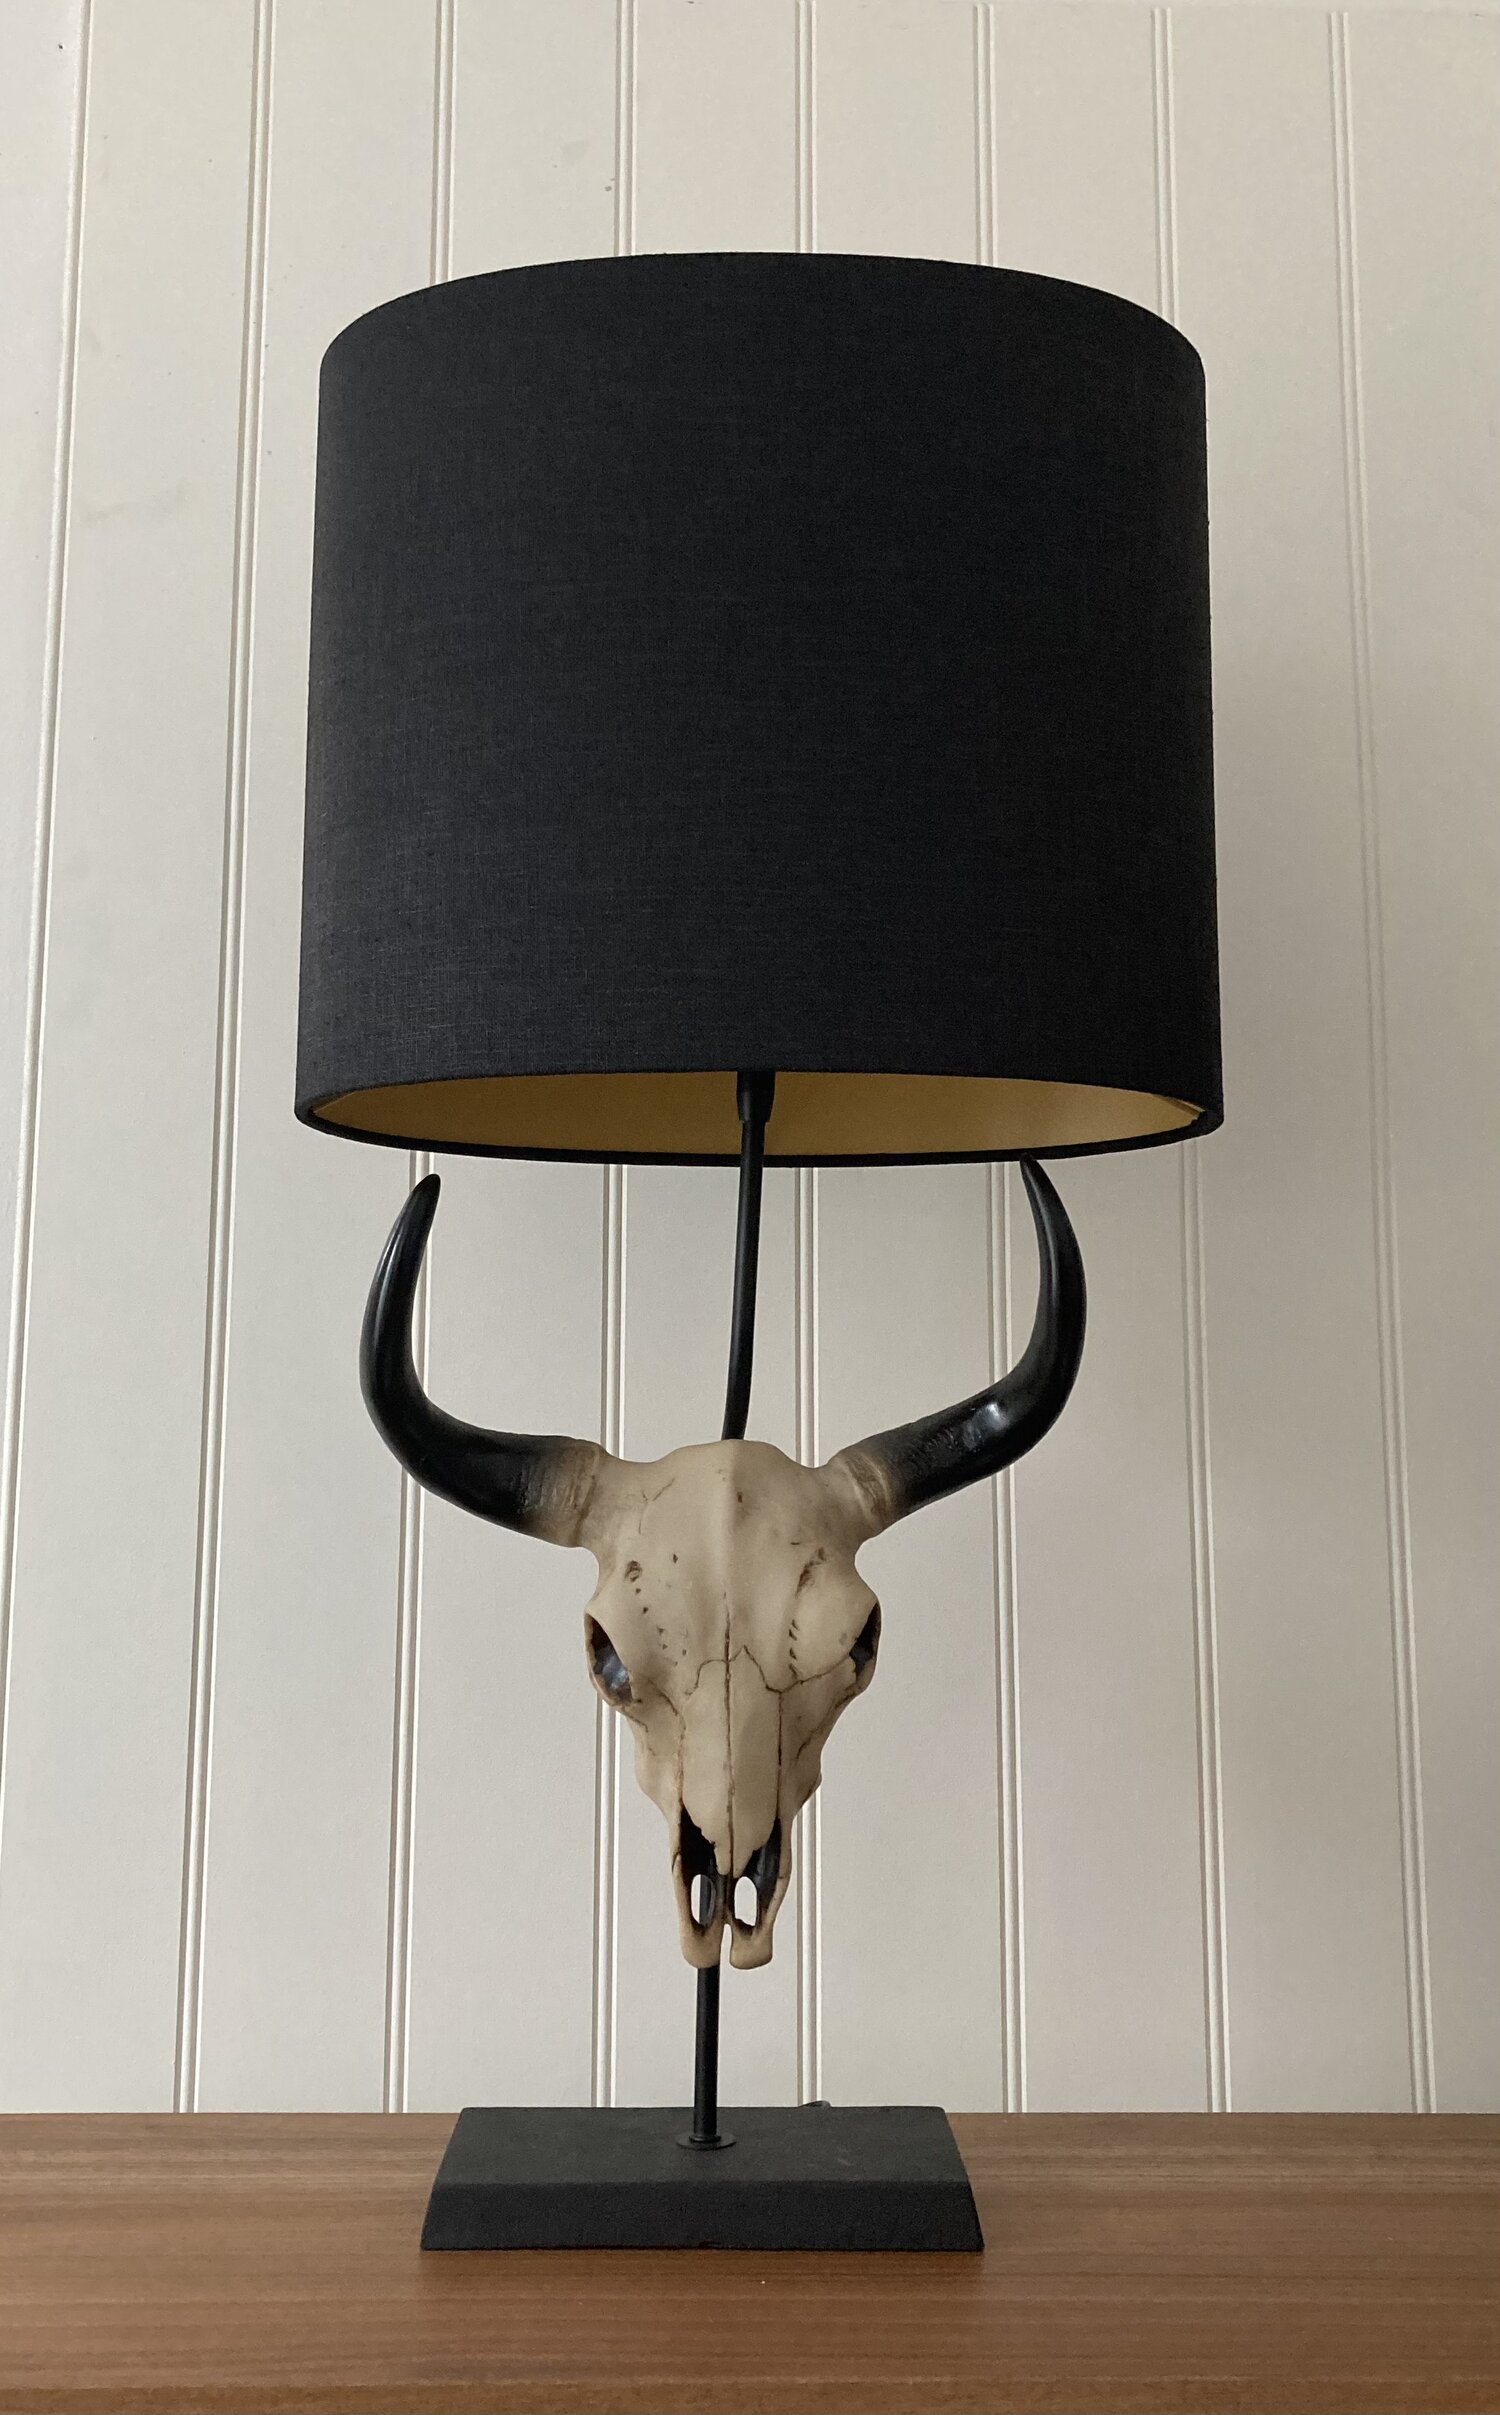 Oval Lampshades Feature Lighting Co Uk, Bespoke Table Lamps Uk